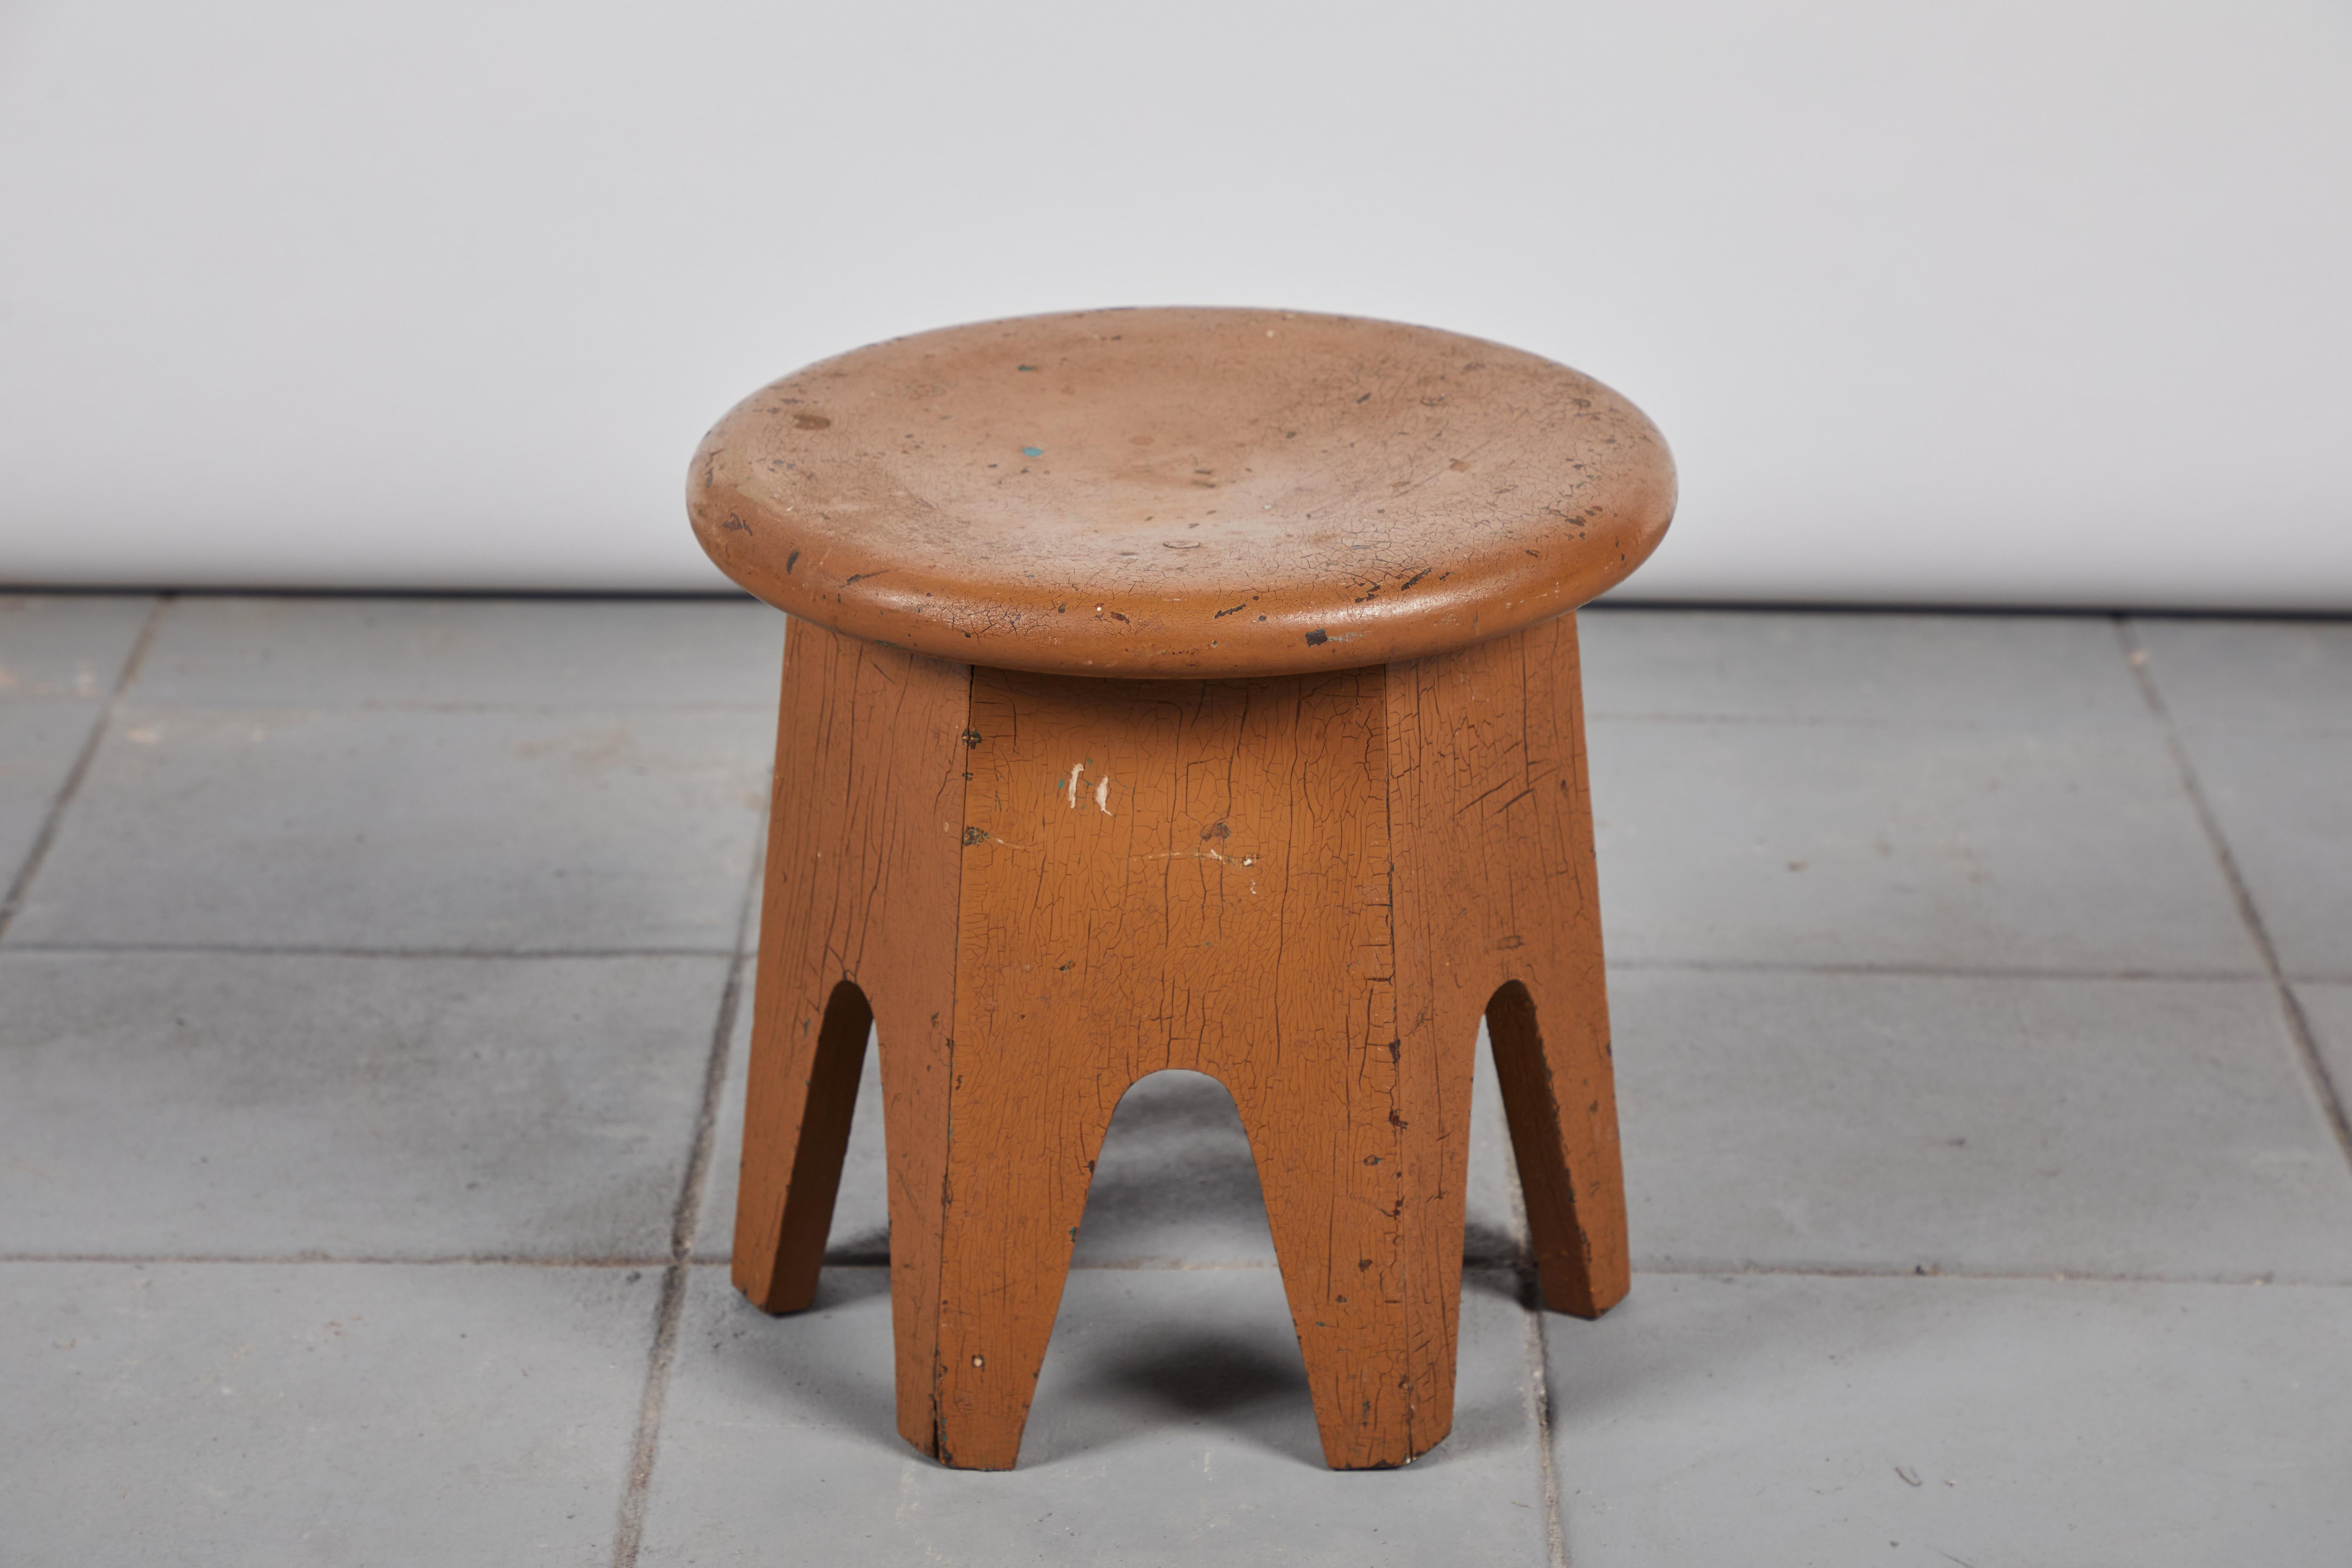 Early American round painted stool with hexagonal bevel sides.